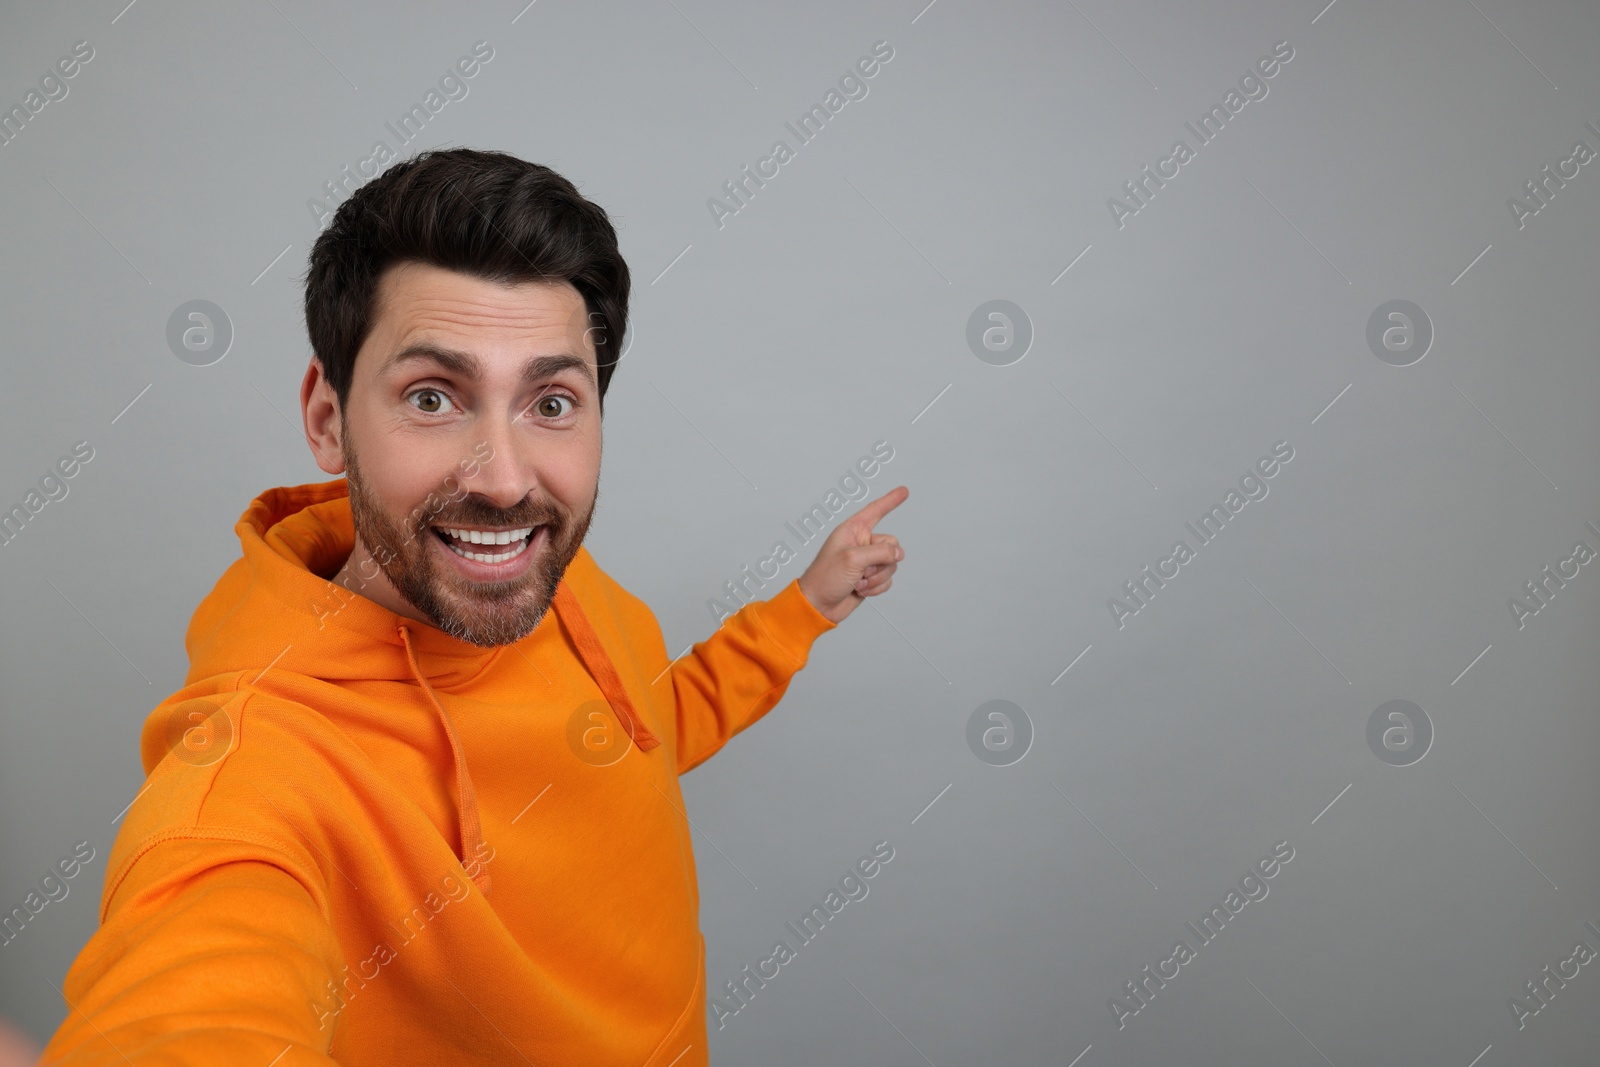 Photo of Smiling man taking selfie on grey background, space for text